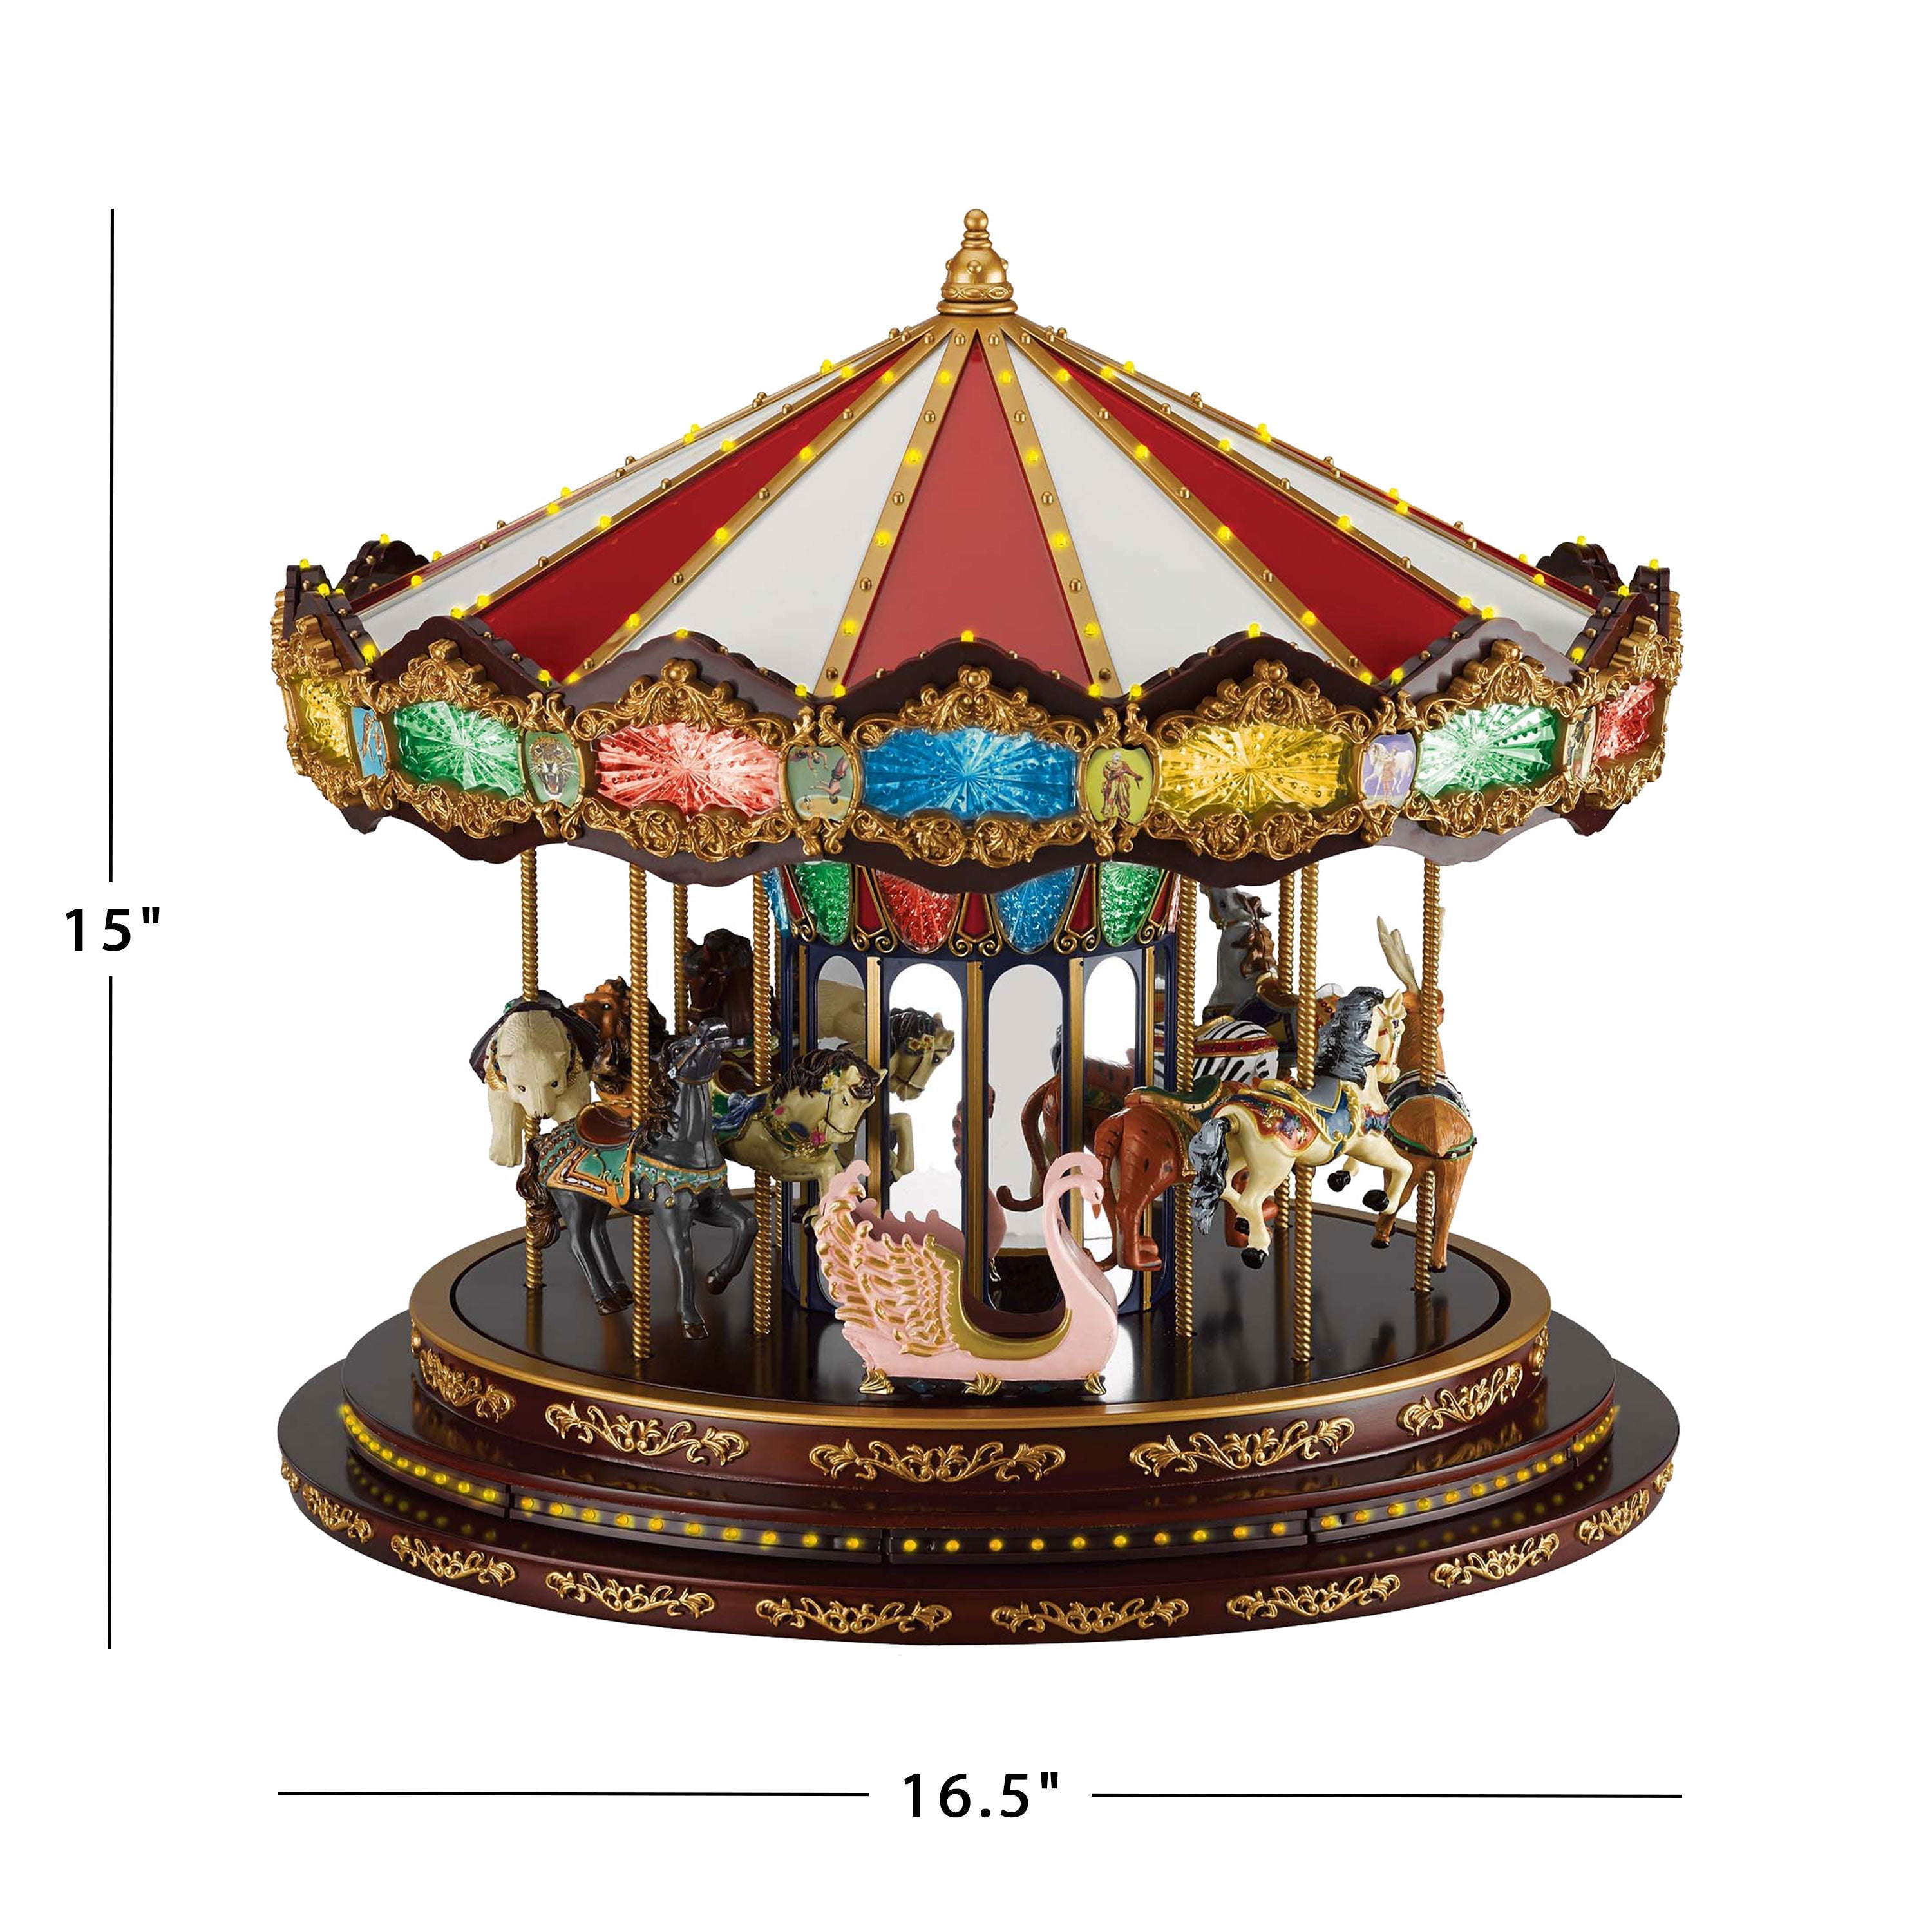 15 in. Marquee Deluxe Carousel – Mr. Christmas